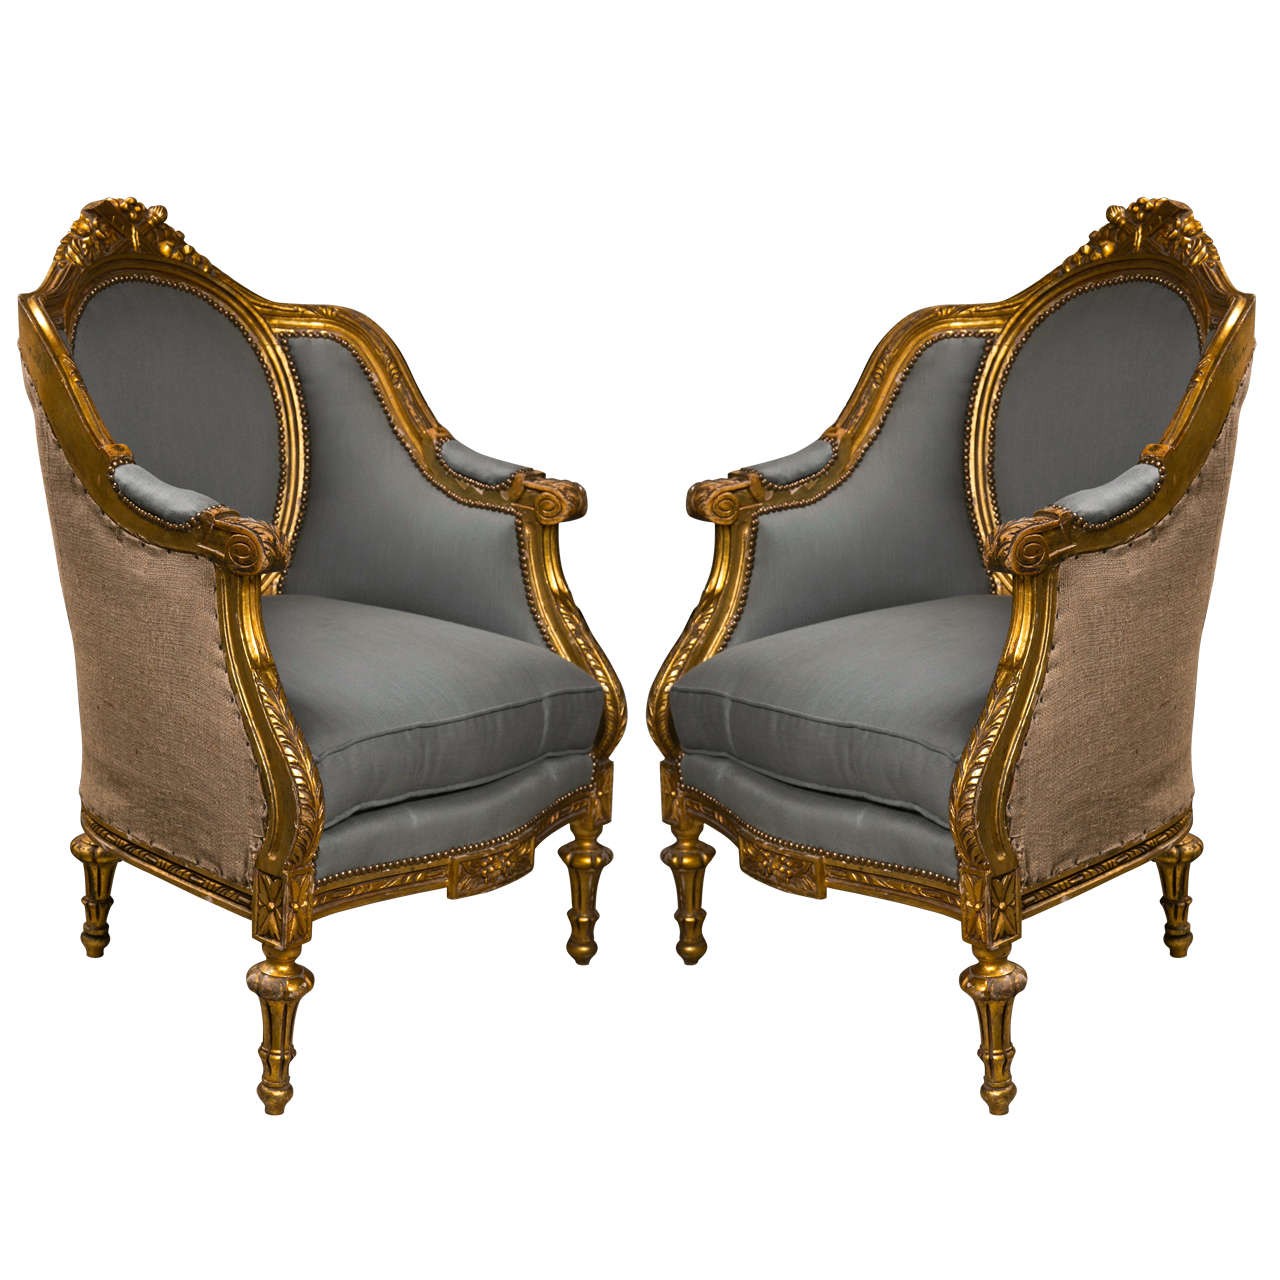 Pair of french louis xvi style bergere chairs